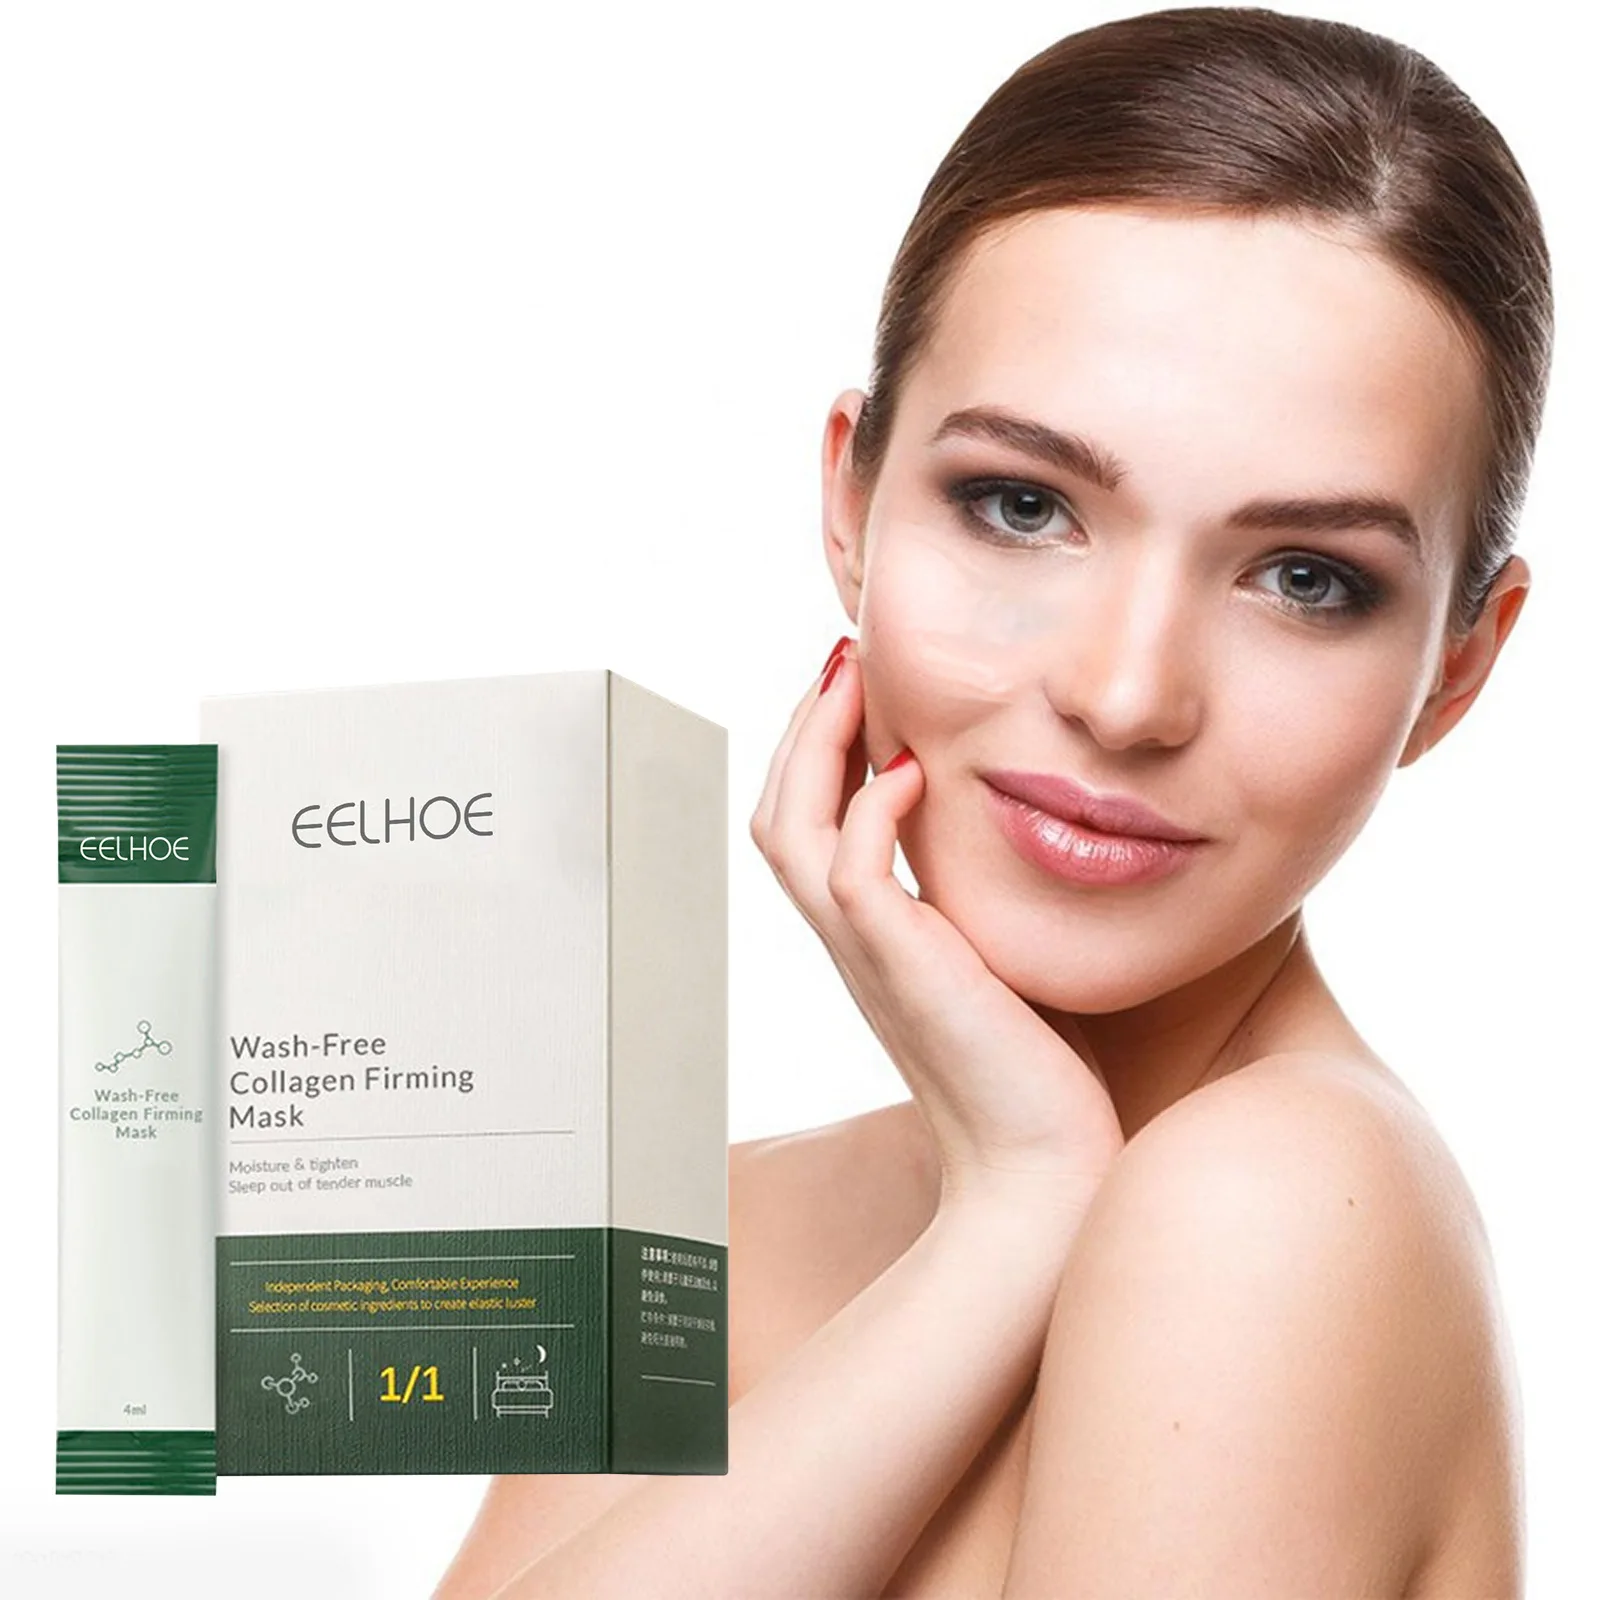 

Eelhoe Collagen Firming Sleeping Mask Wash-Free Application Mask Nourishing and Hydrating Night Cream Firming Fading Wrinkle